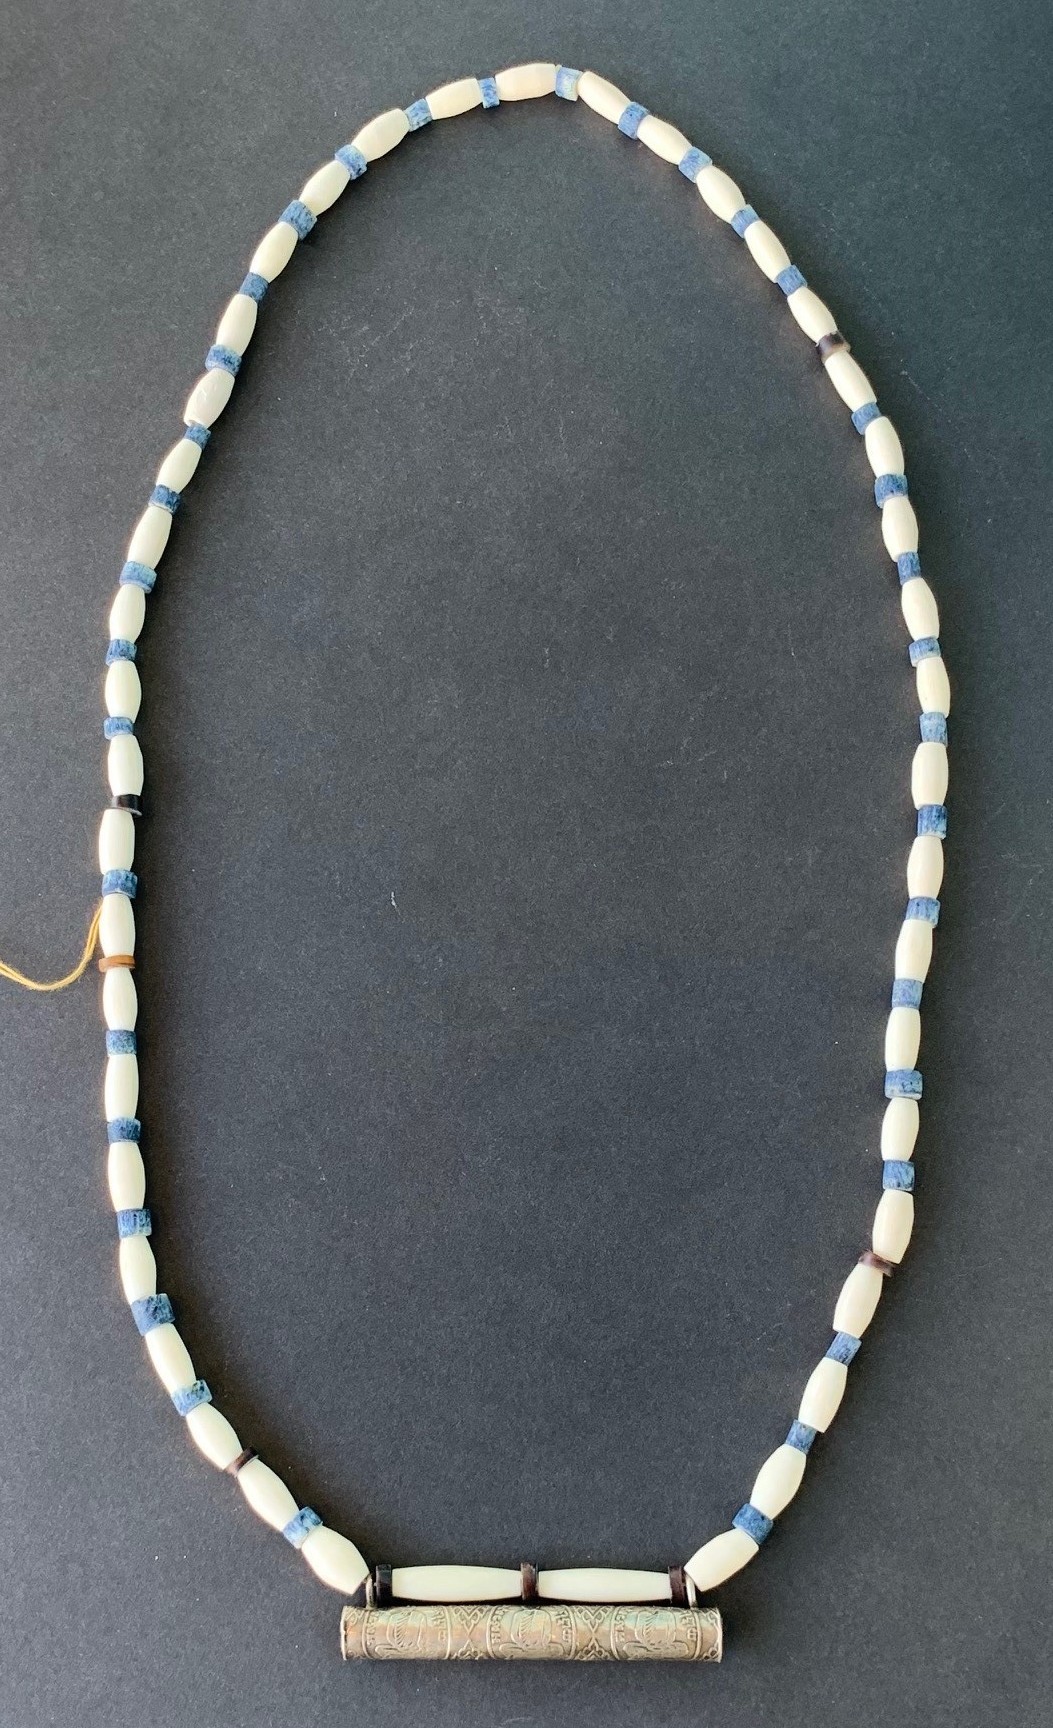 Necklace, “Blue & White Bead with Silver Bar Pendant”, Jewelry